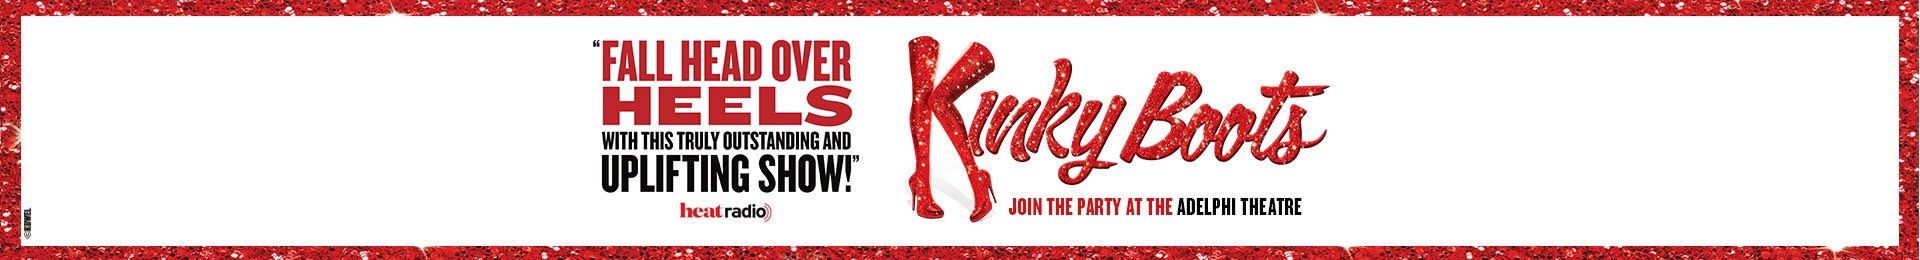 Kinky Boots at the Adelphi Theatre in London Tickets